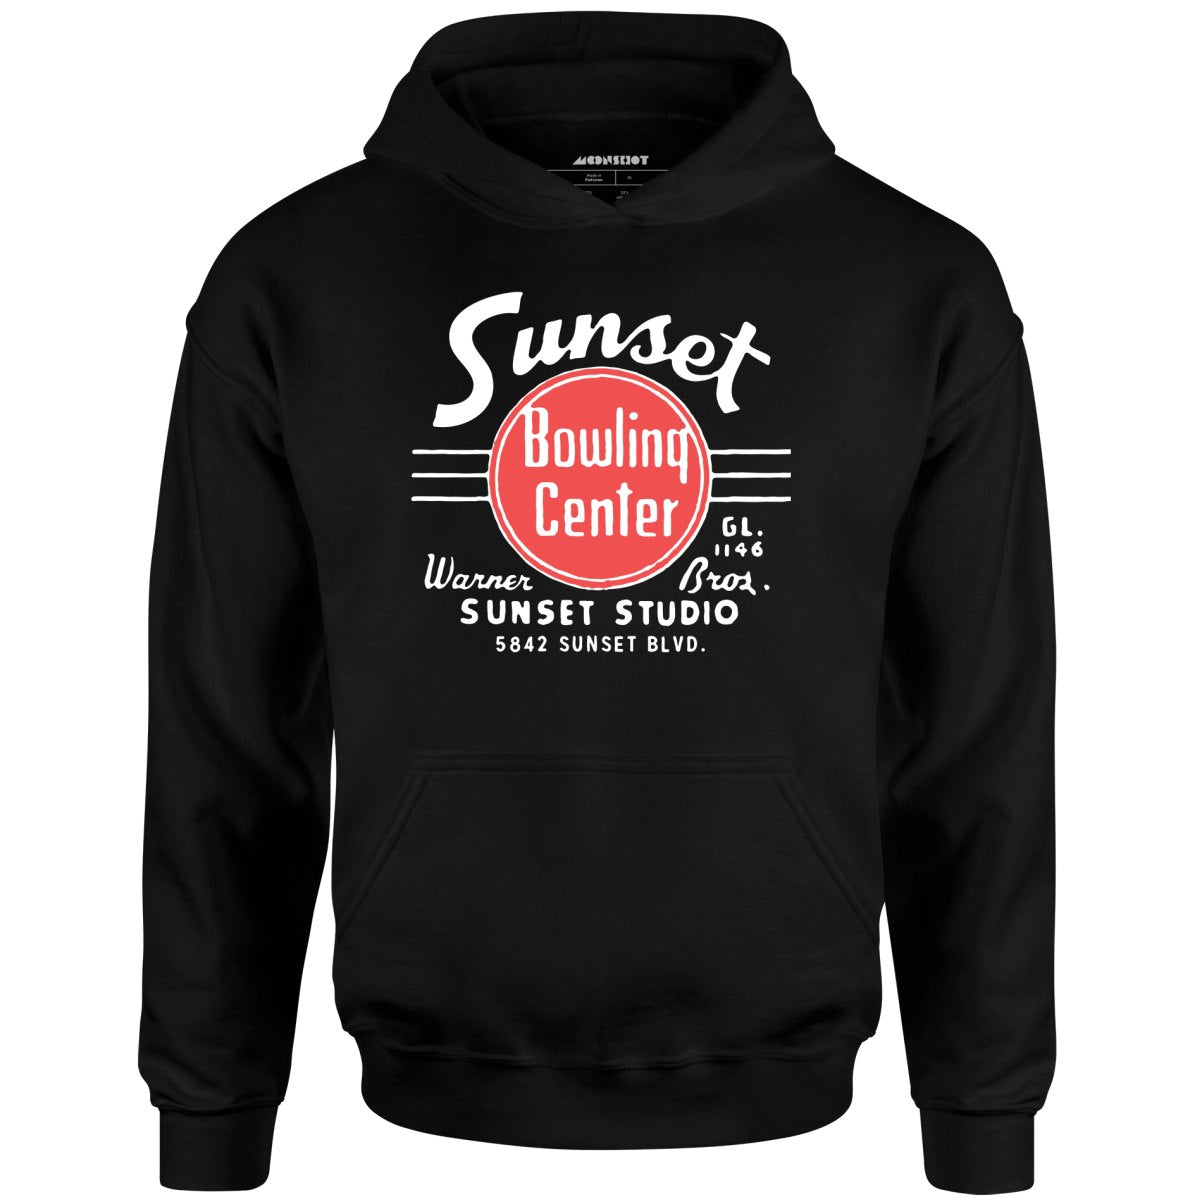 Sunset Bowling Center v2 - Hollywood, CA - Vintage Bowling Alley - Unisex Hoodie